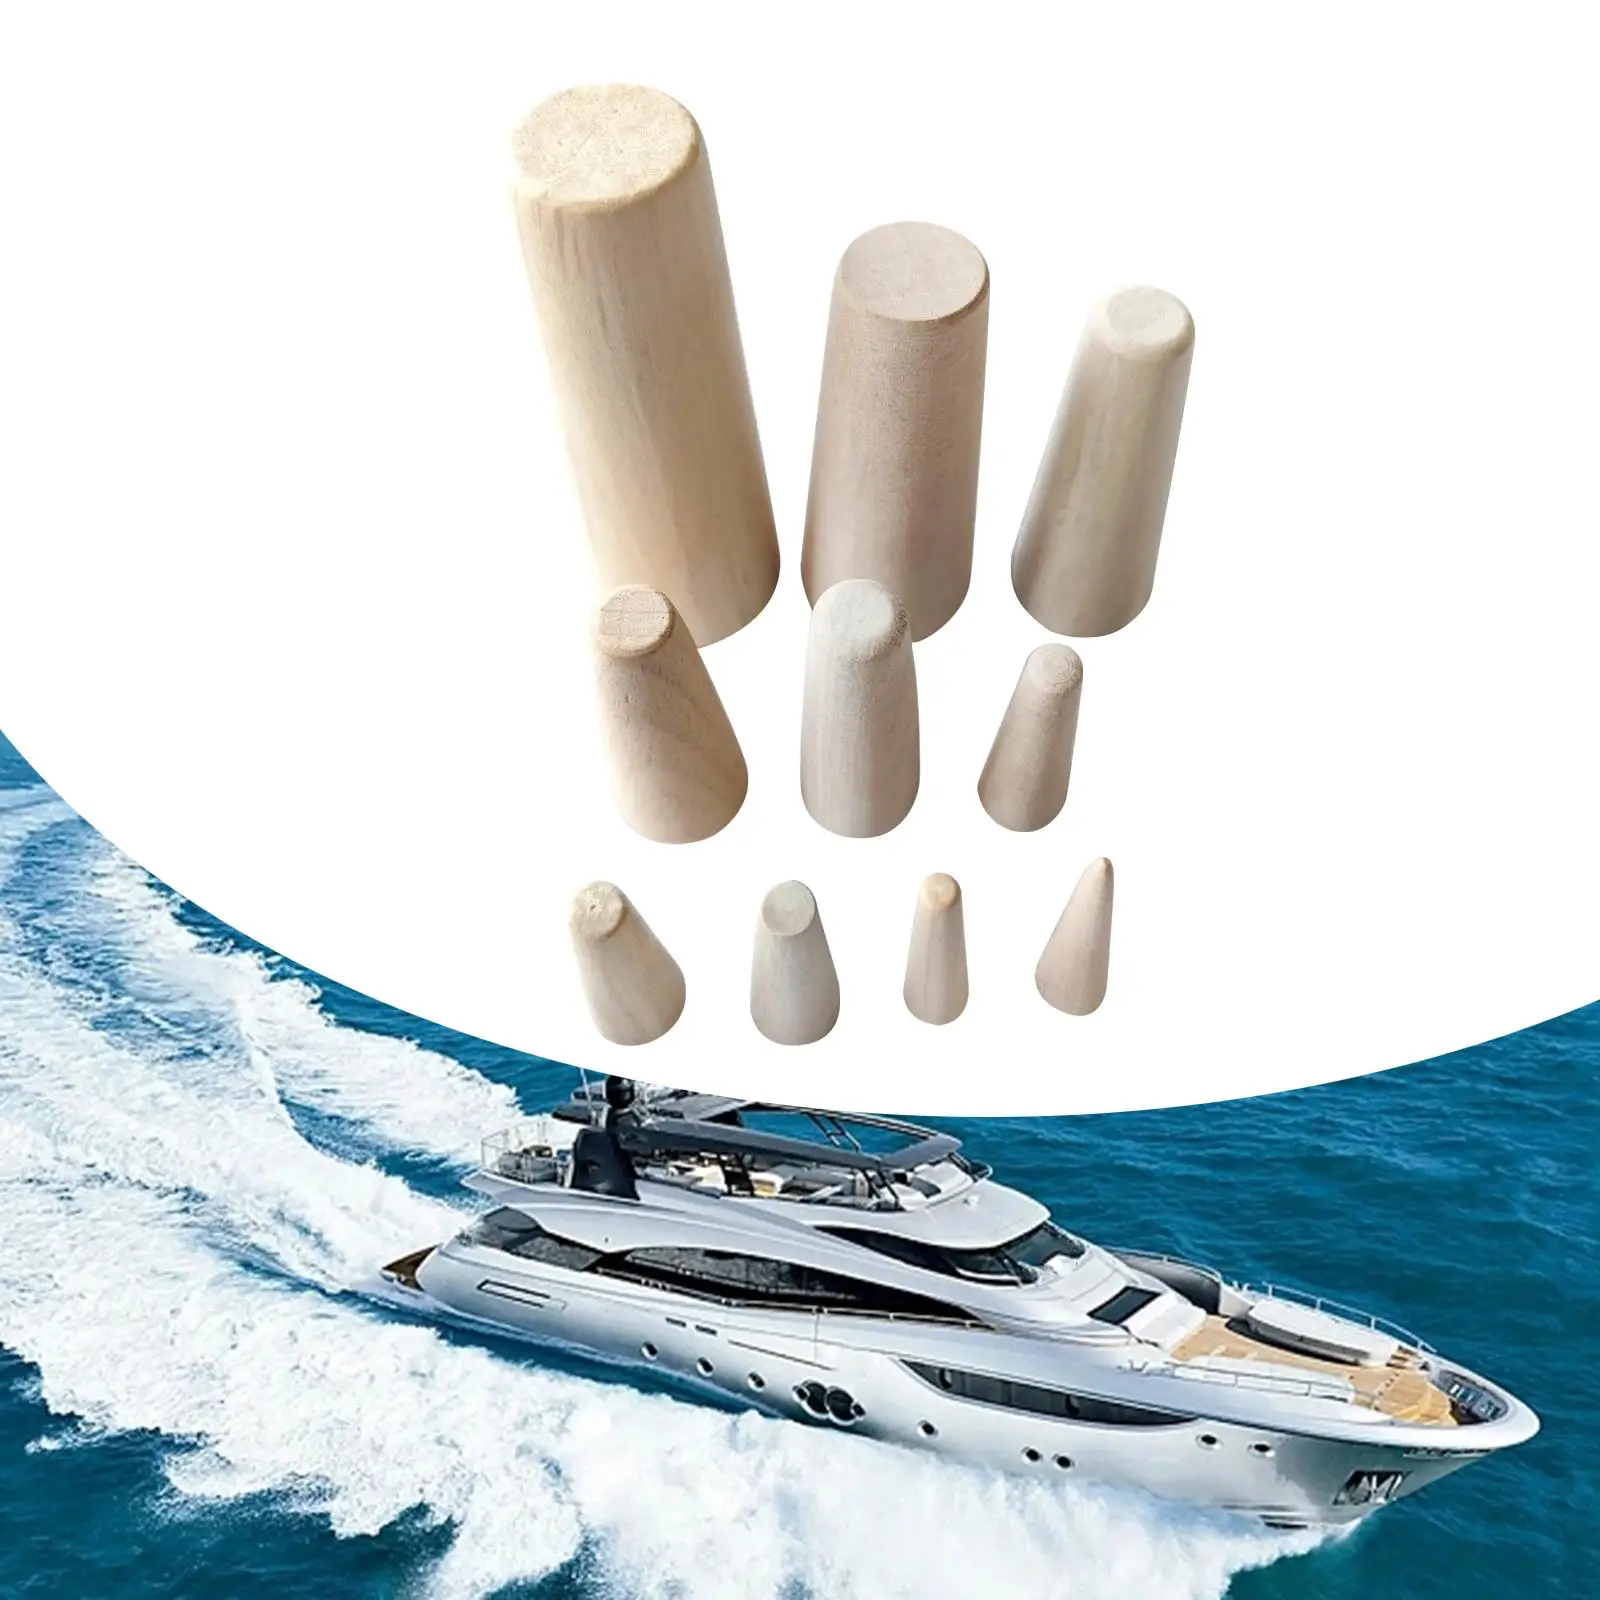 10x Boat Emergency Wood Plugs Durable Wooden Bungs for Boat Yacht Ships